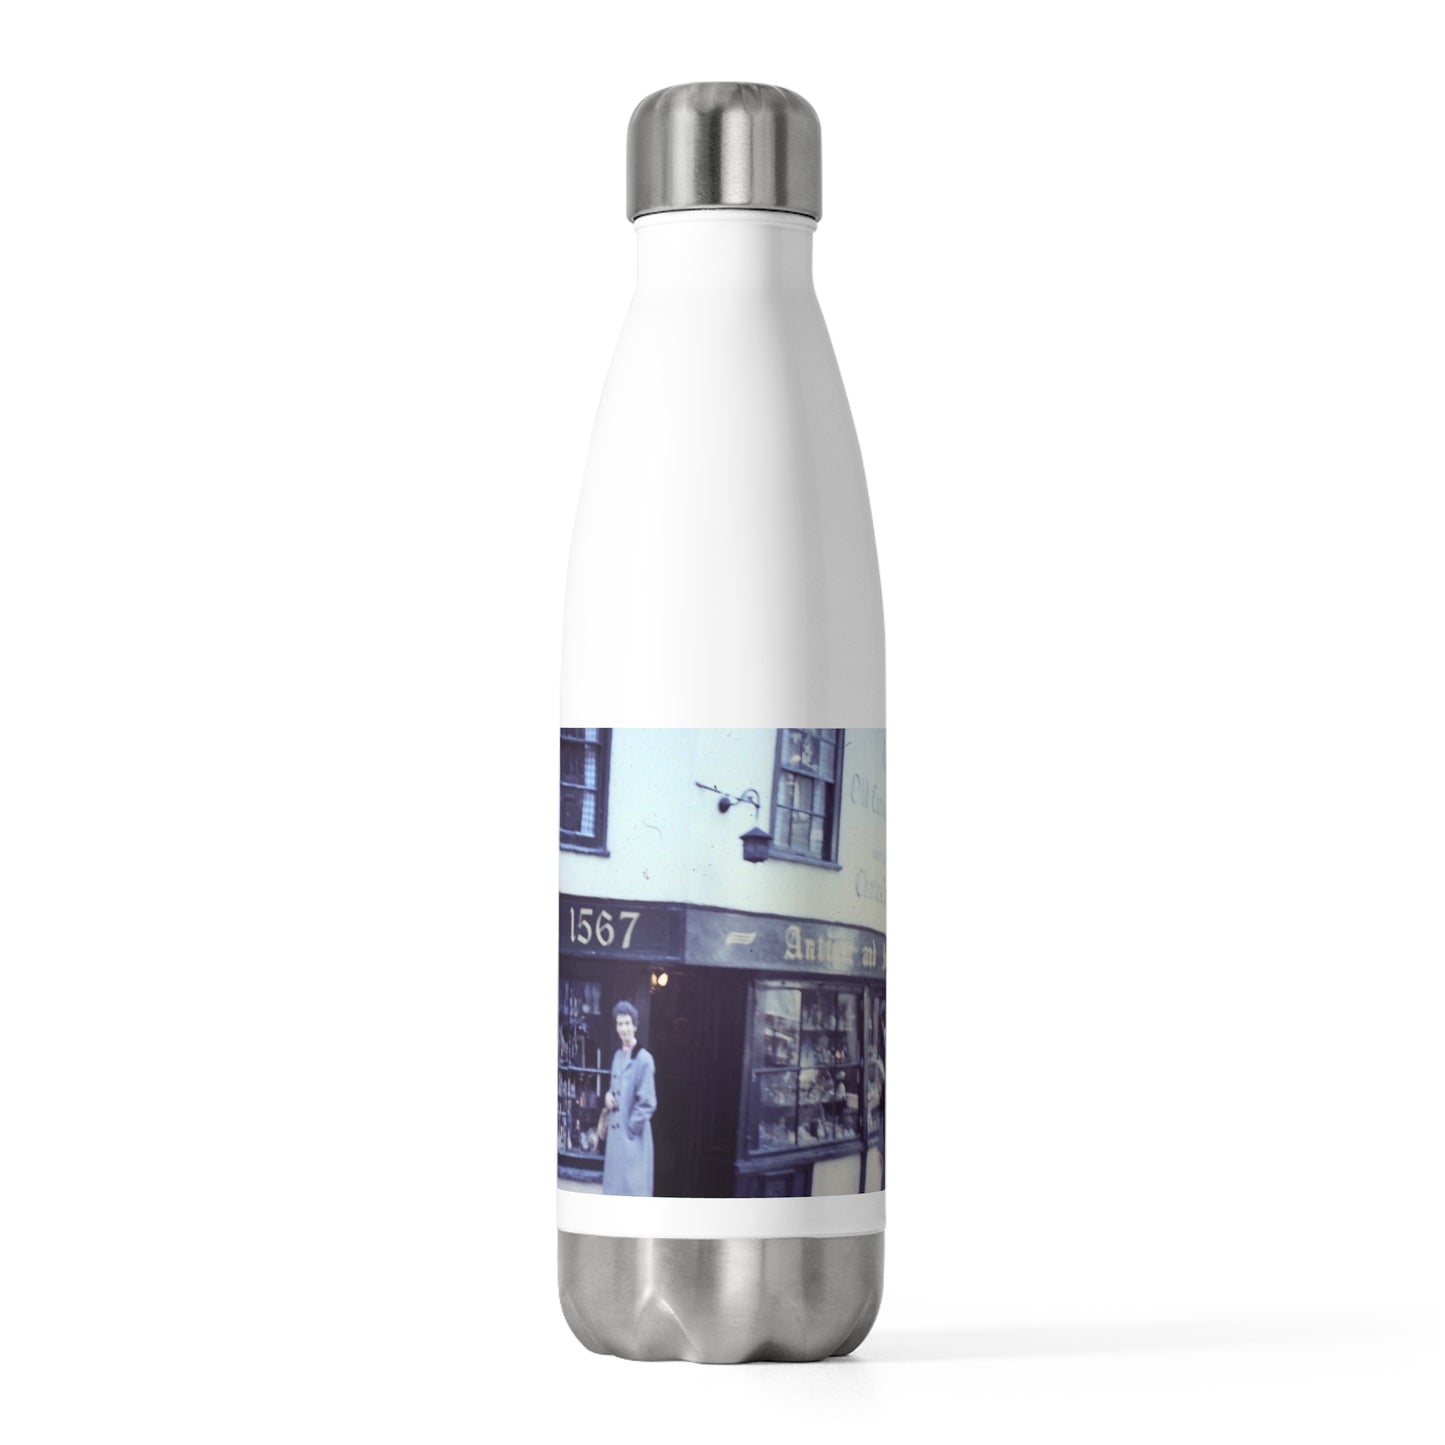 Europe 1967 No 8 20oz Insulated Bottle